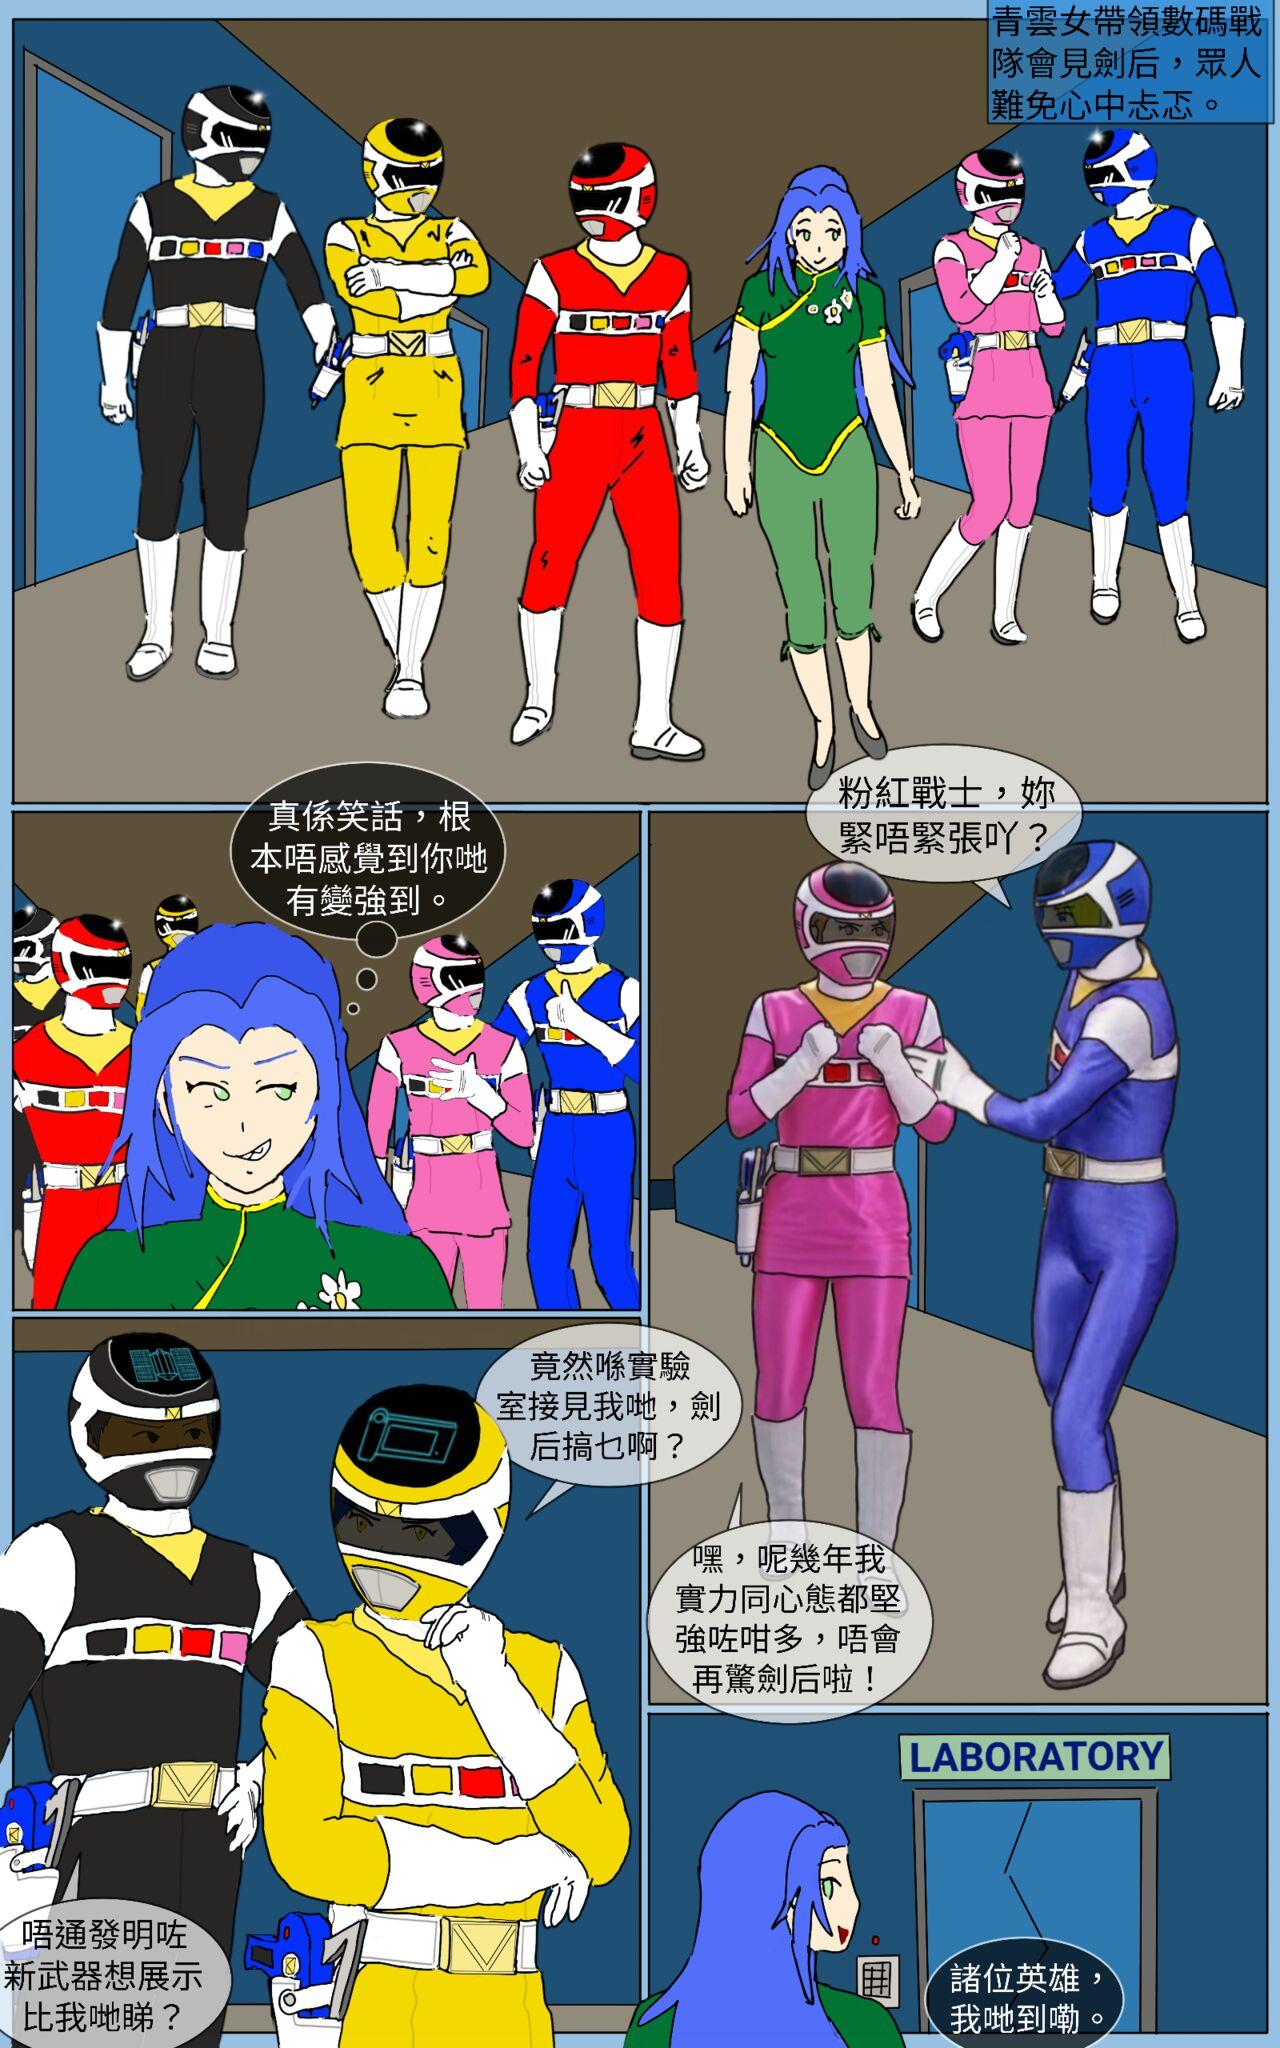 Family Roleplay Mission 32 - Super sentai Mojada - Page 2